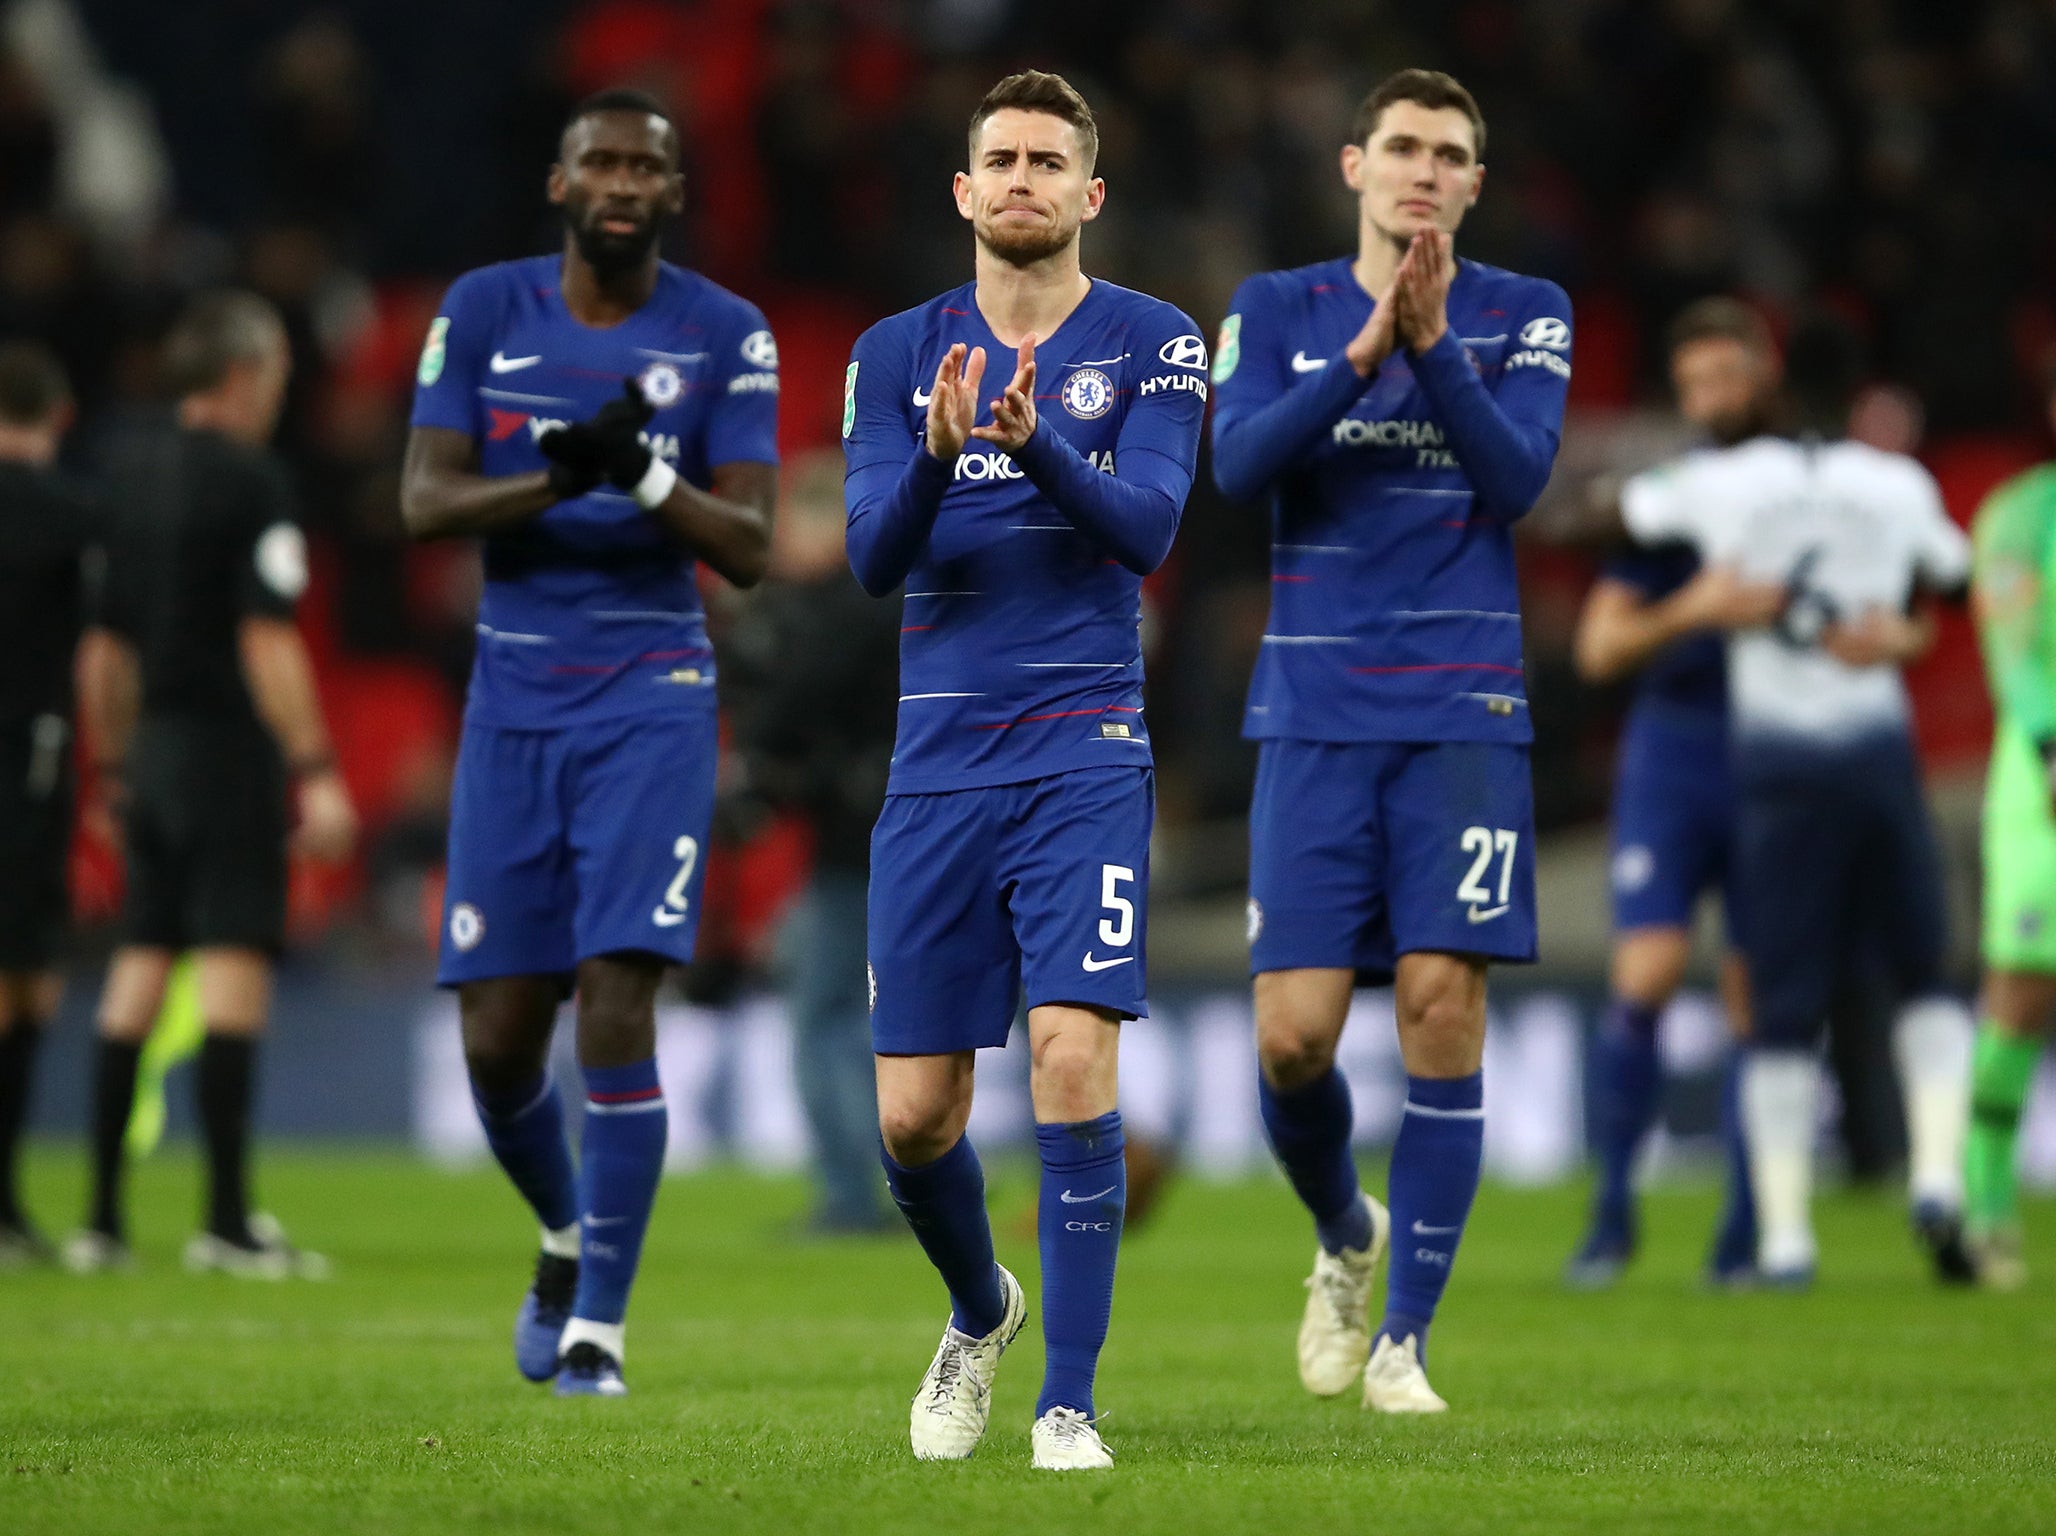 Chelsea suffered defeat against Spurs on Tuesday